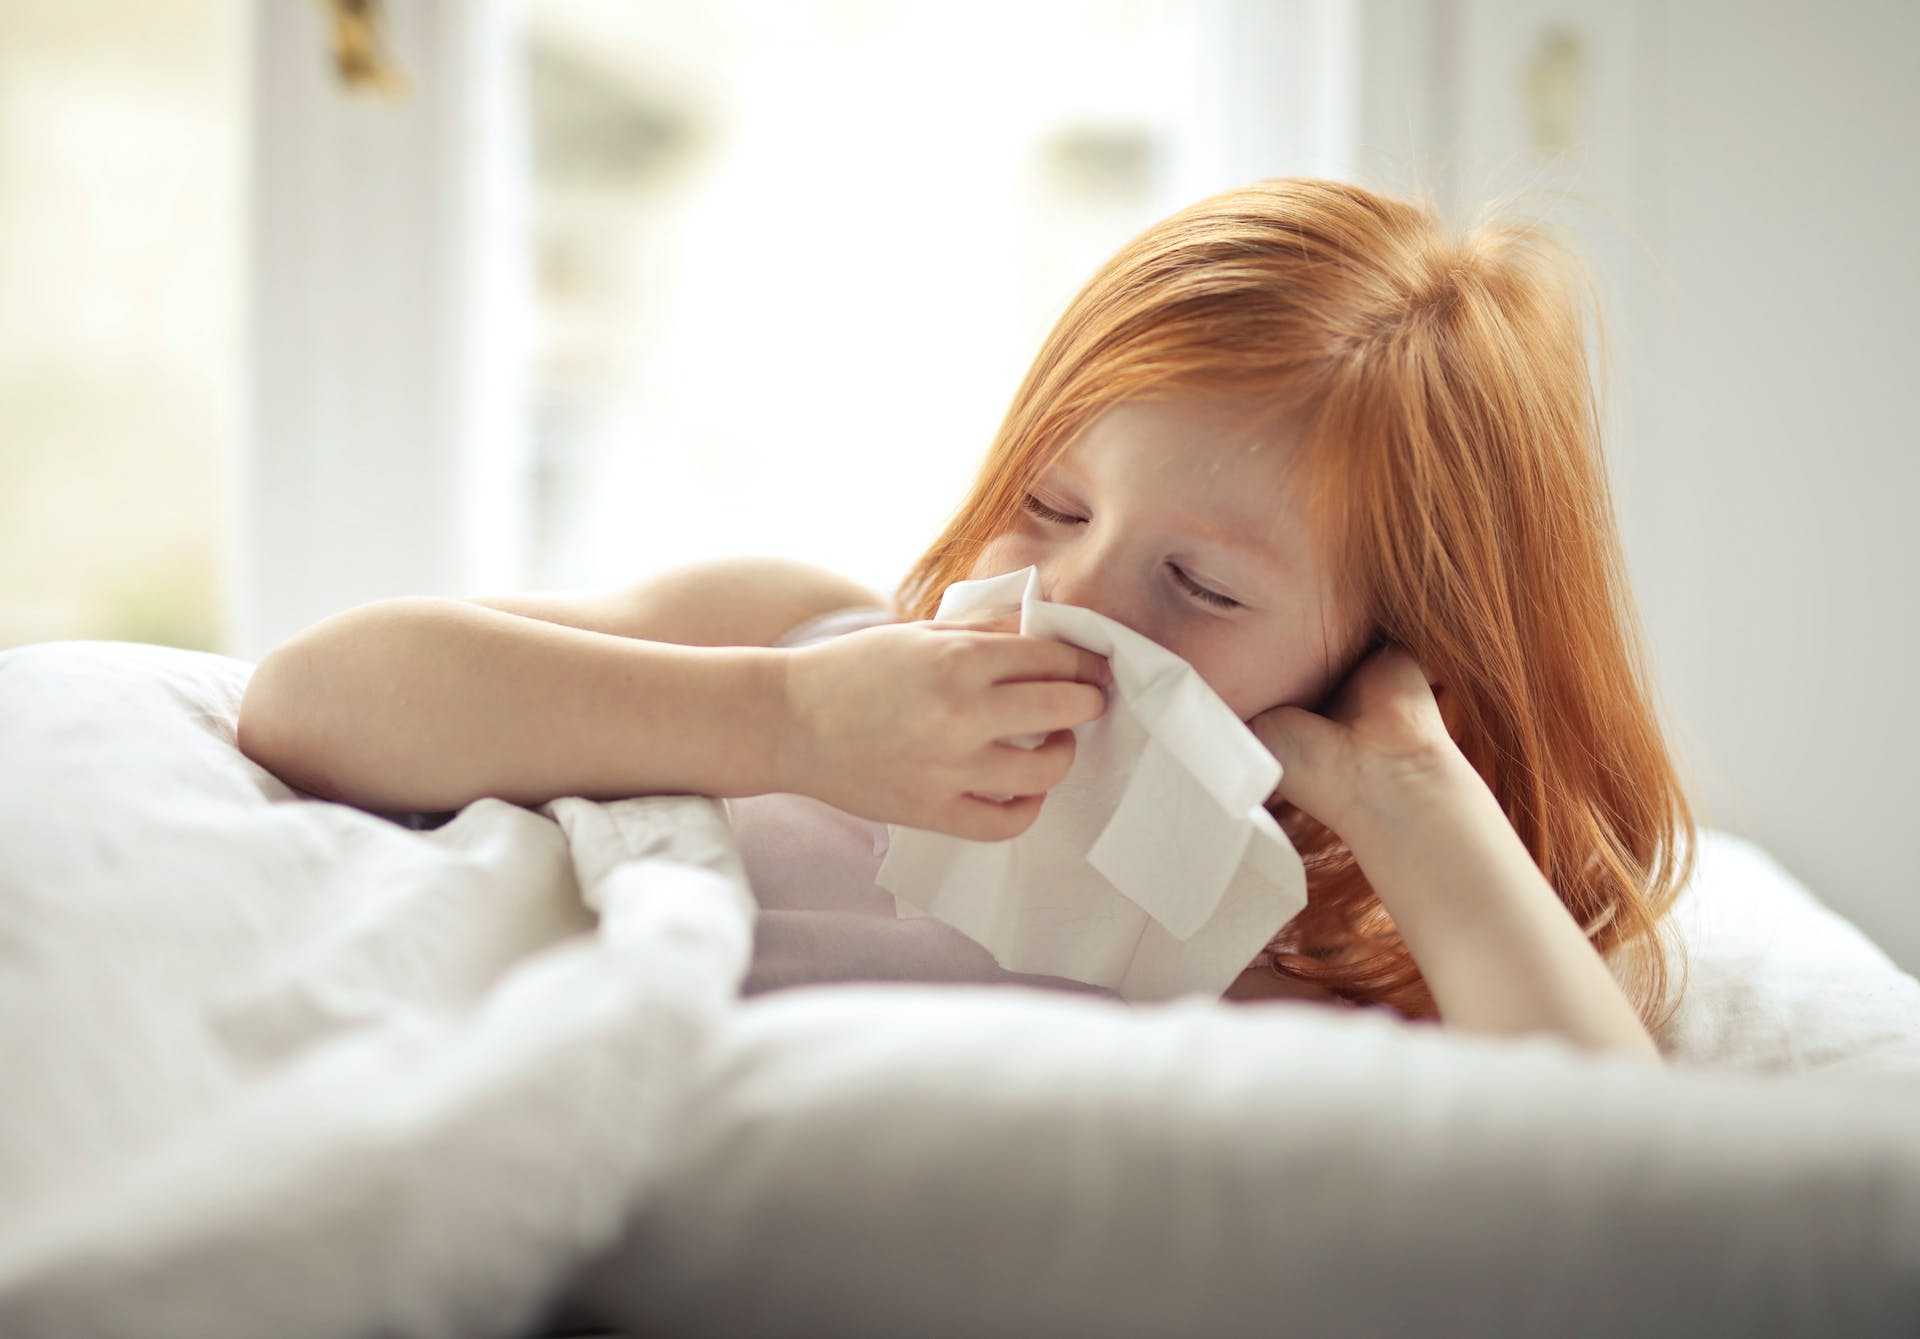 Little girl wiping her nose with a tissue | Source: Pexels